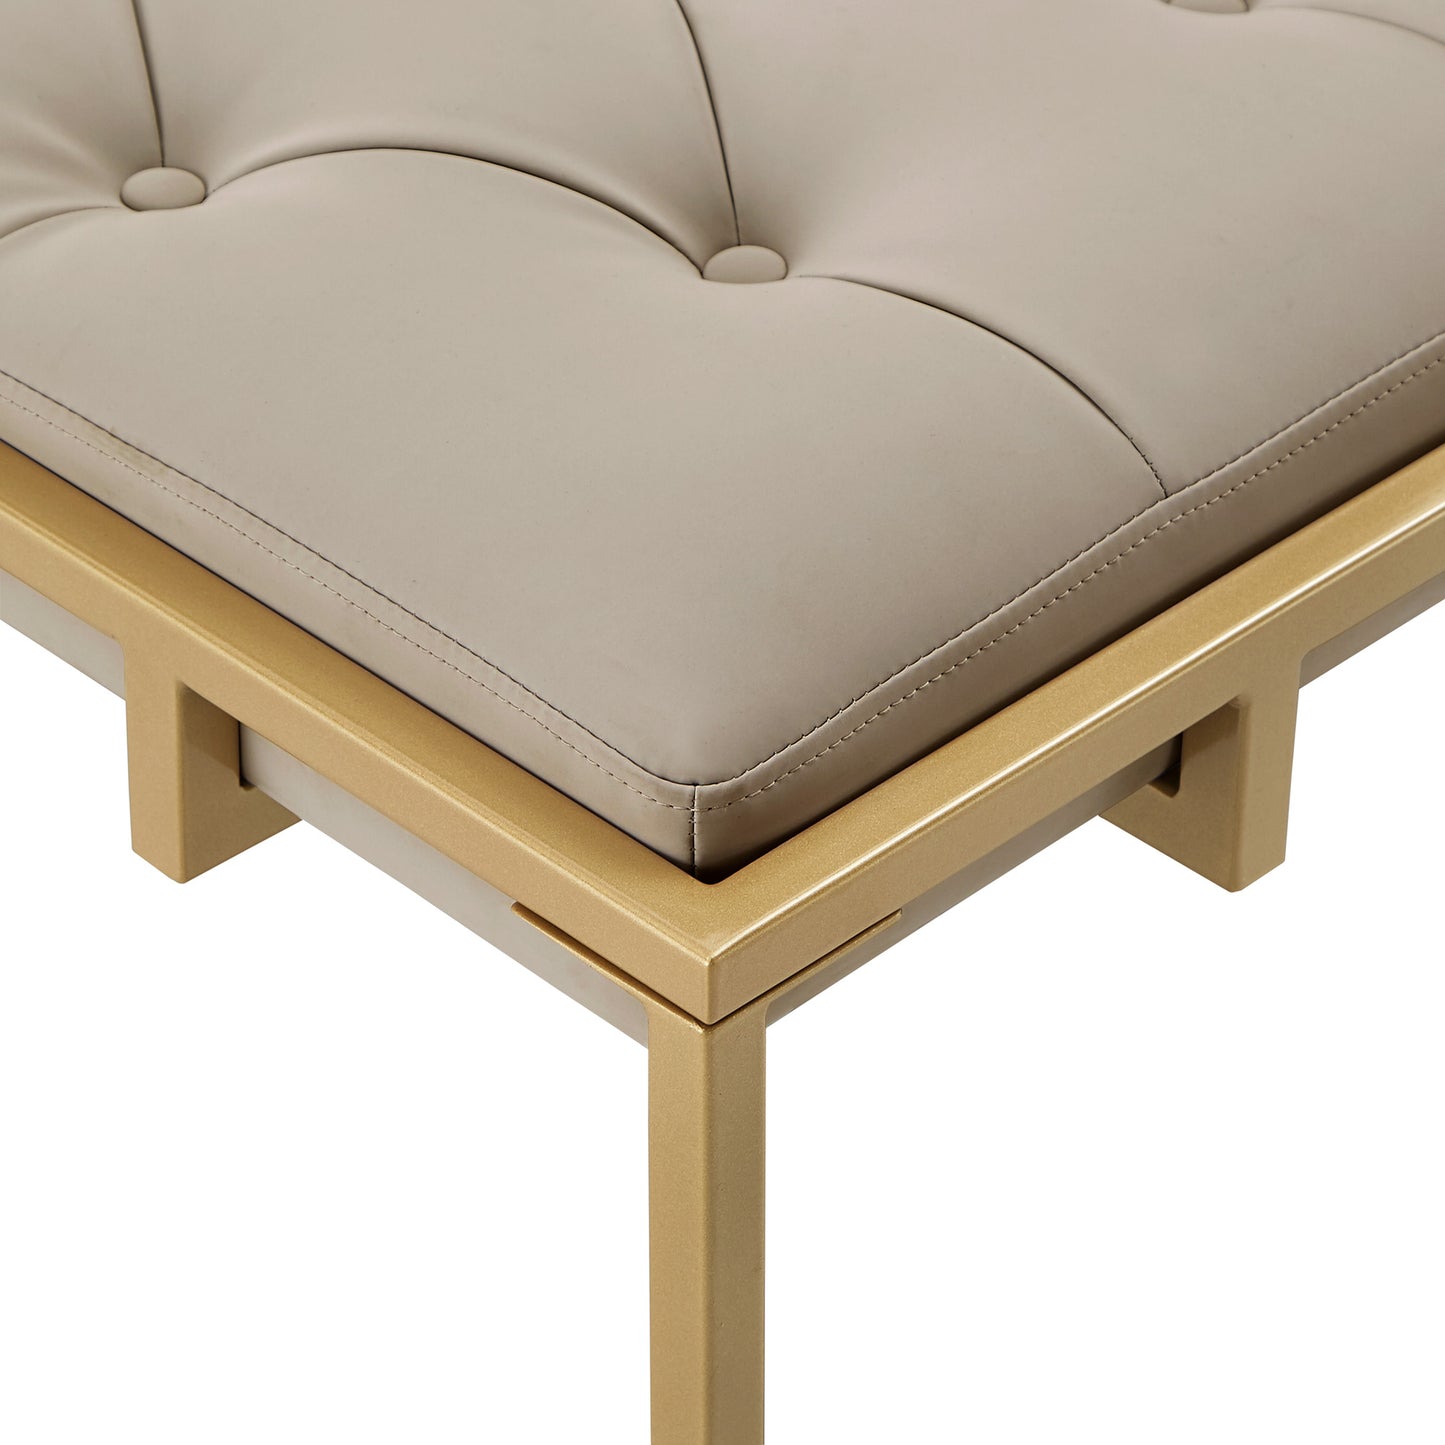 Faux Leather Tufted Square Ottoman - Beige